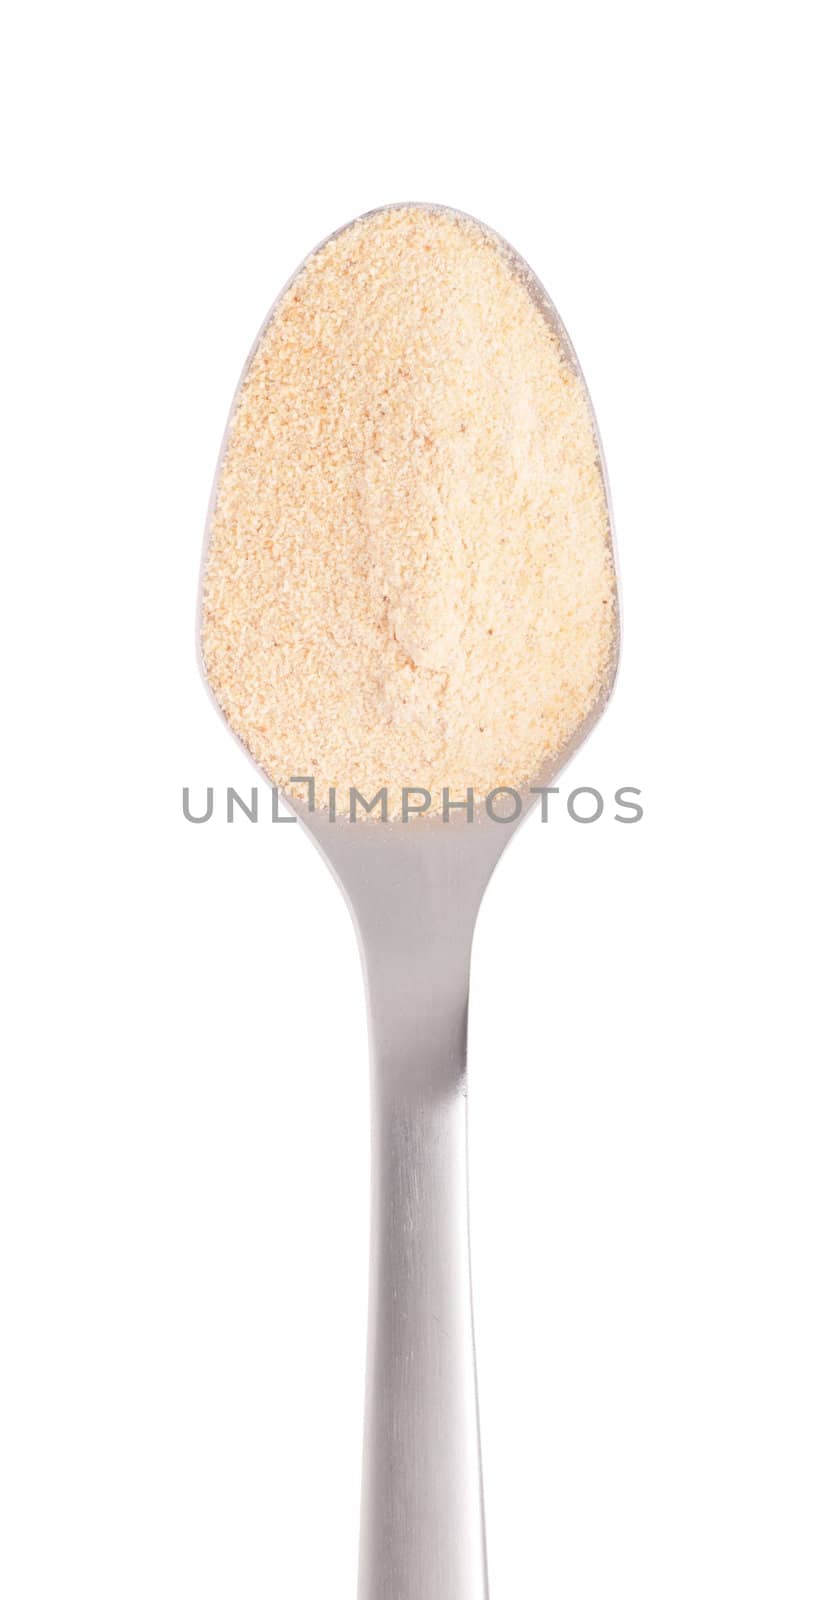 garlic spice on a stainless steel spoon, isolated on white background